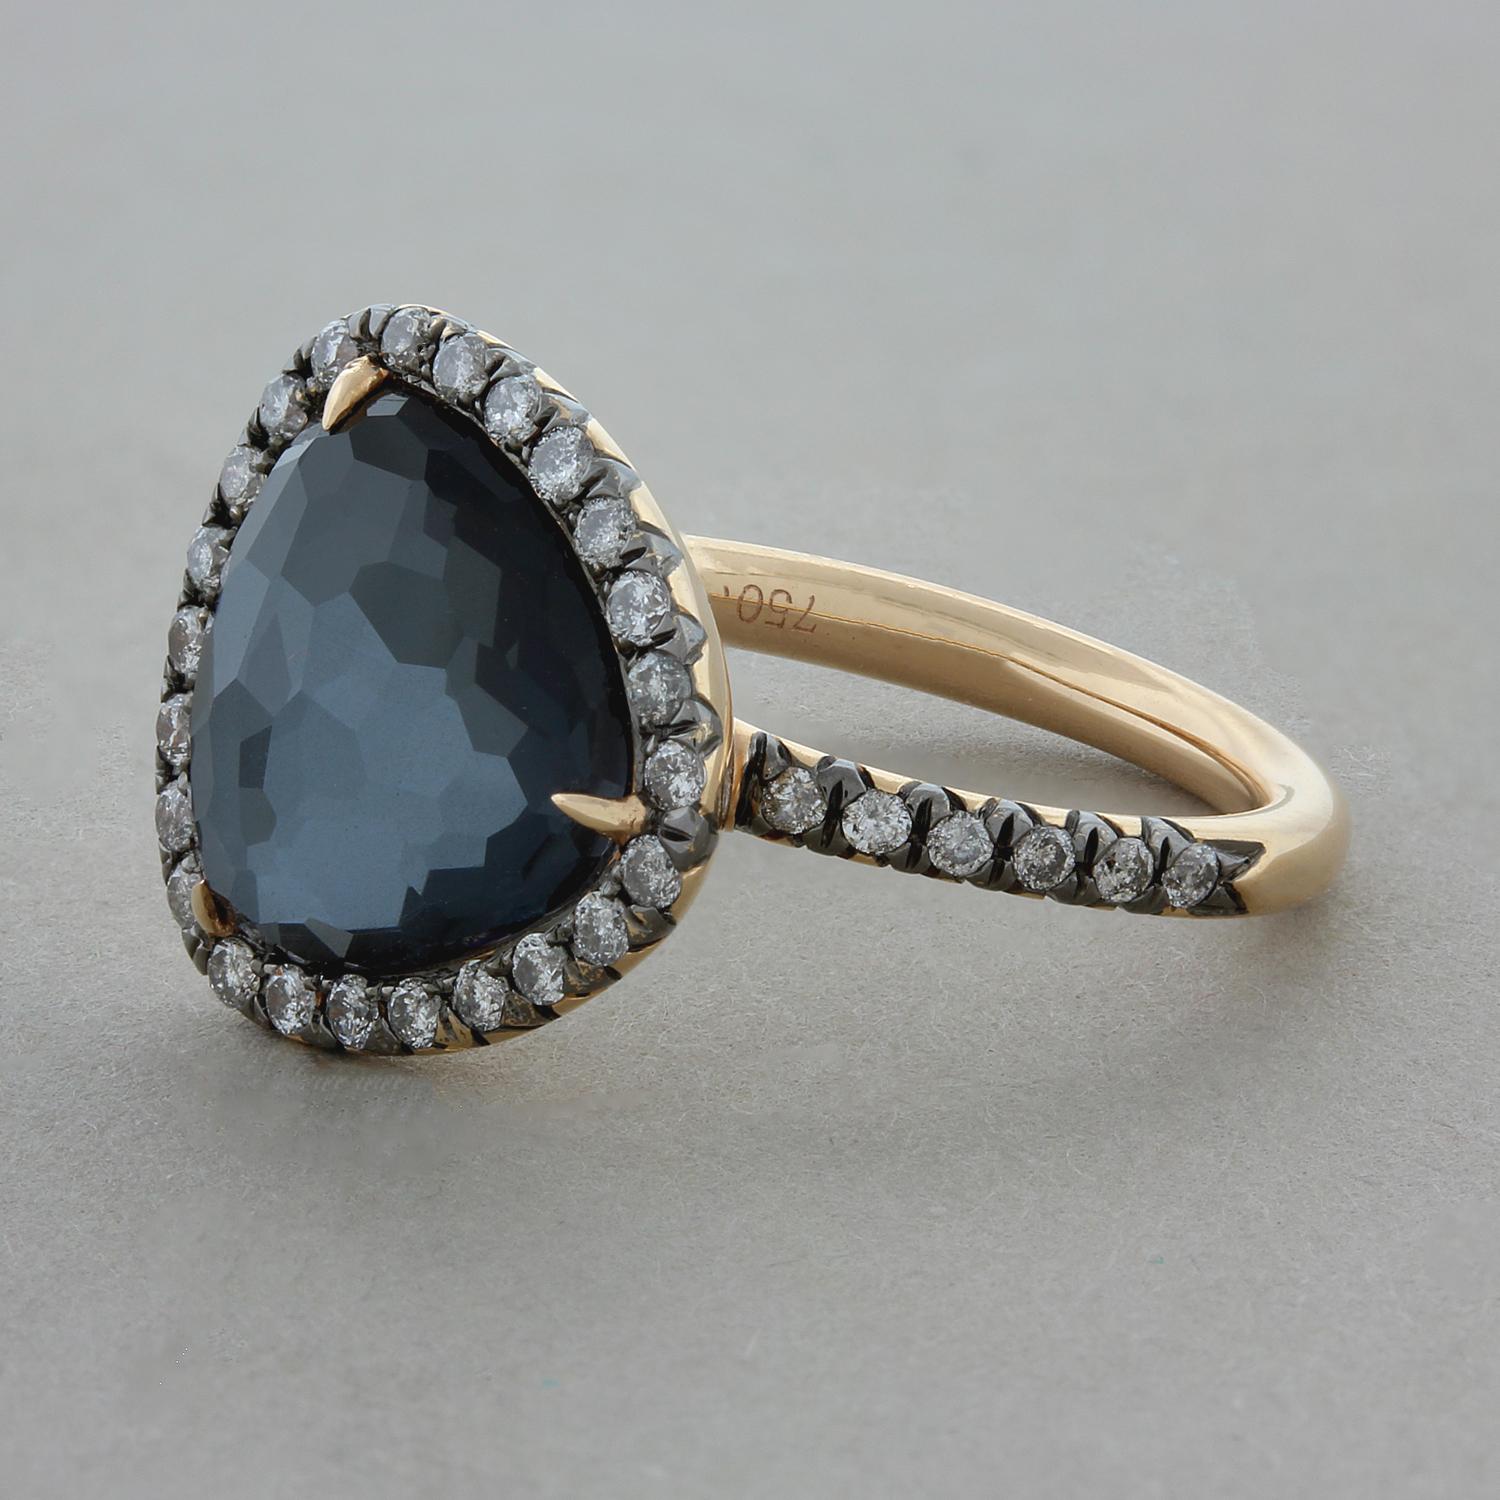 This unique everyday ring features a 2.80 carat trillion cut colorless quartz that is set directly on-top a piece of hematite giving the quartz a rich metallic color. It is accented by 0.49 carats or round brilliant cut diamonds that create a halo